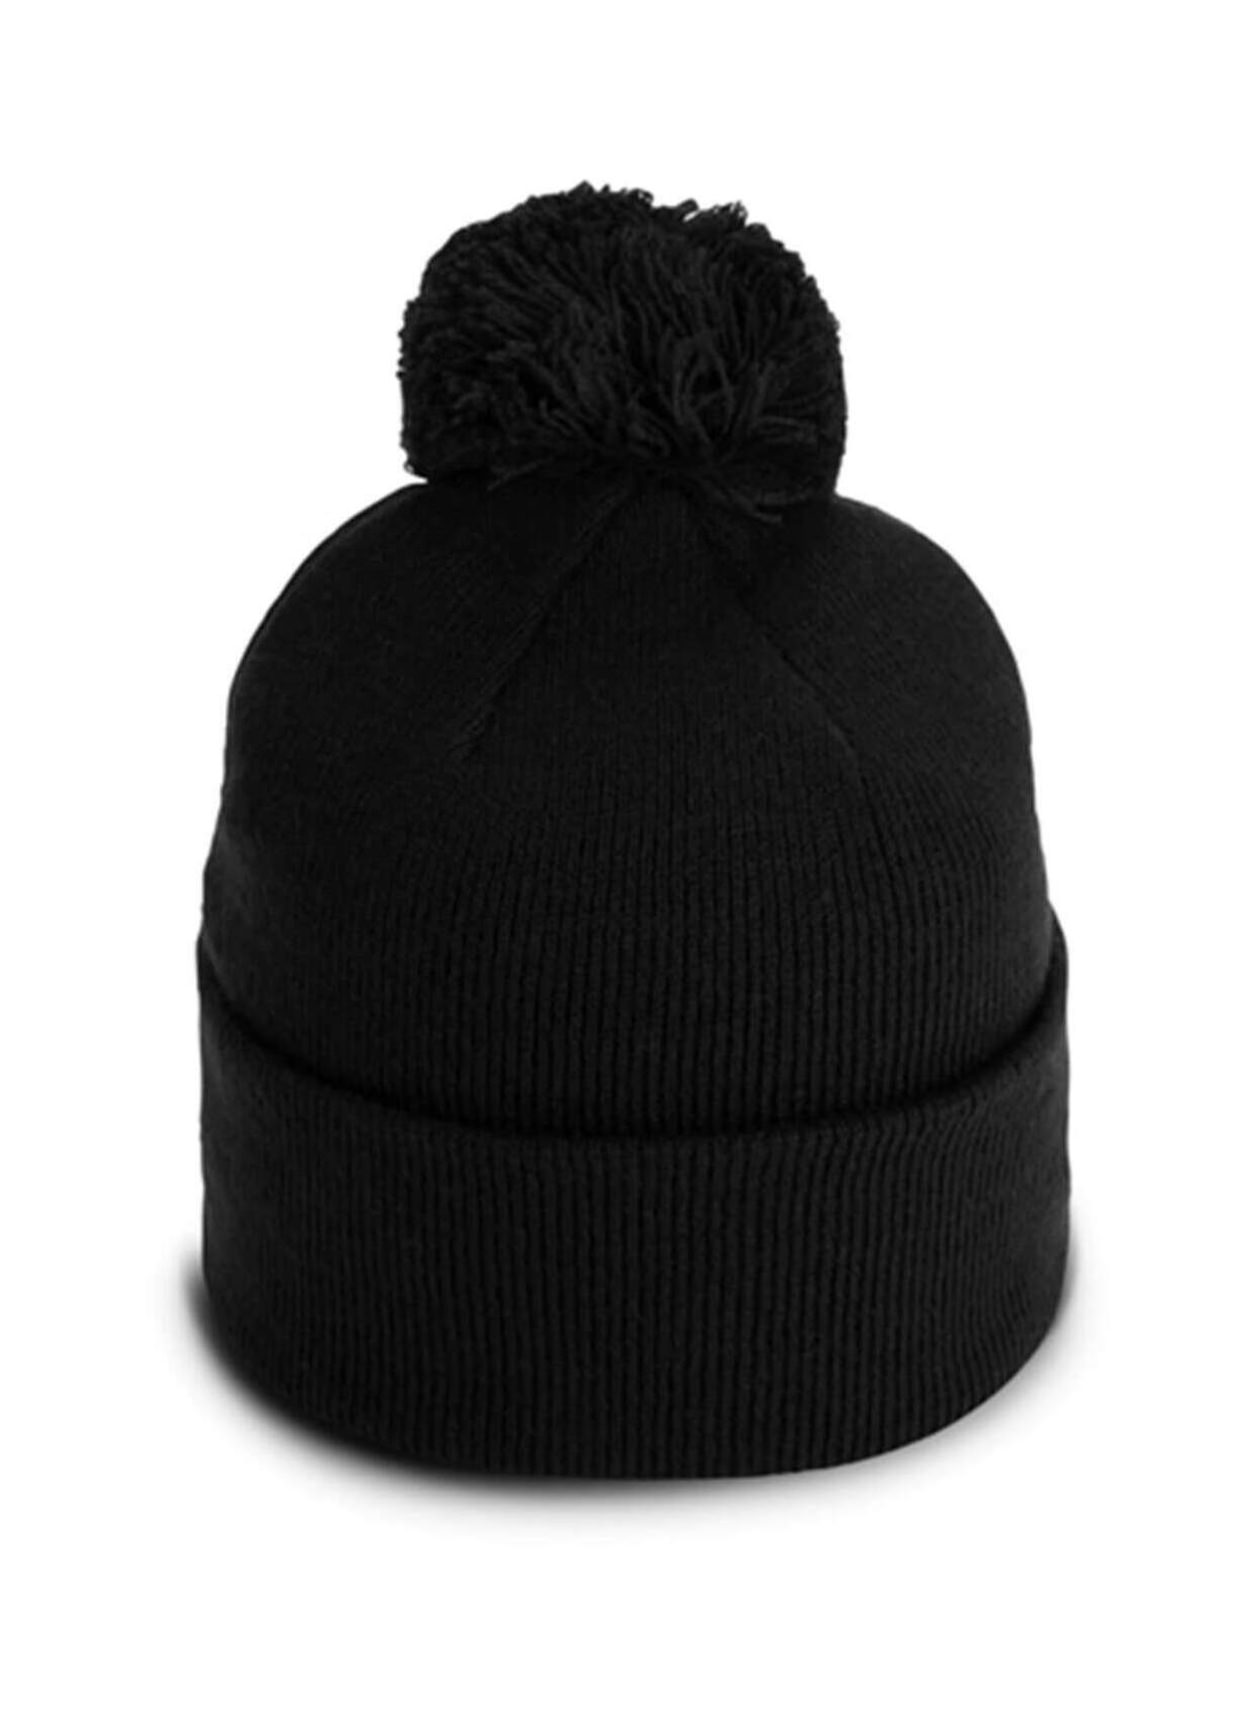 Imperial Black The Tahoe Knit Beanie with Pom